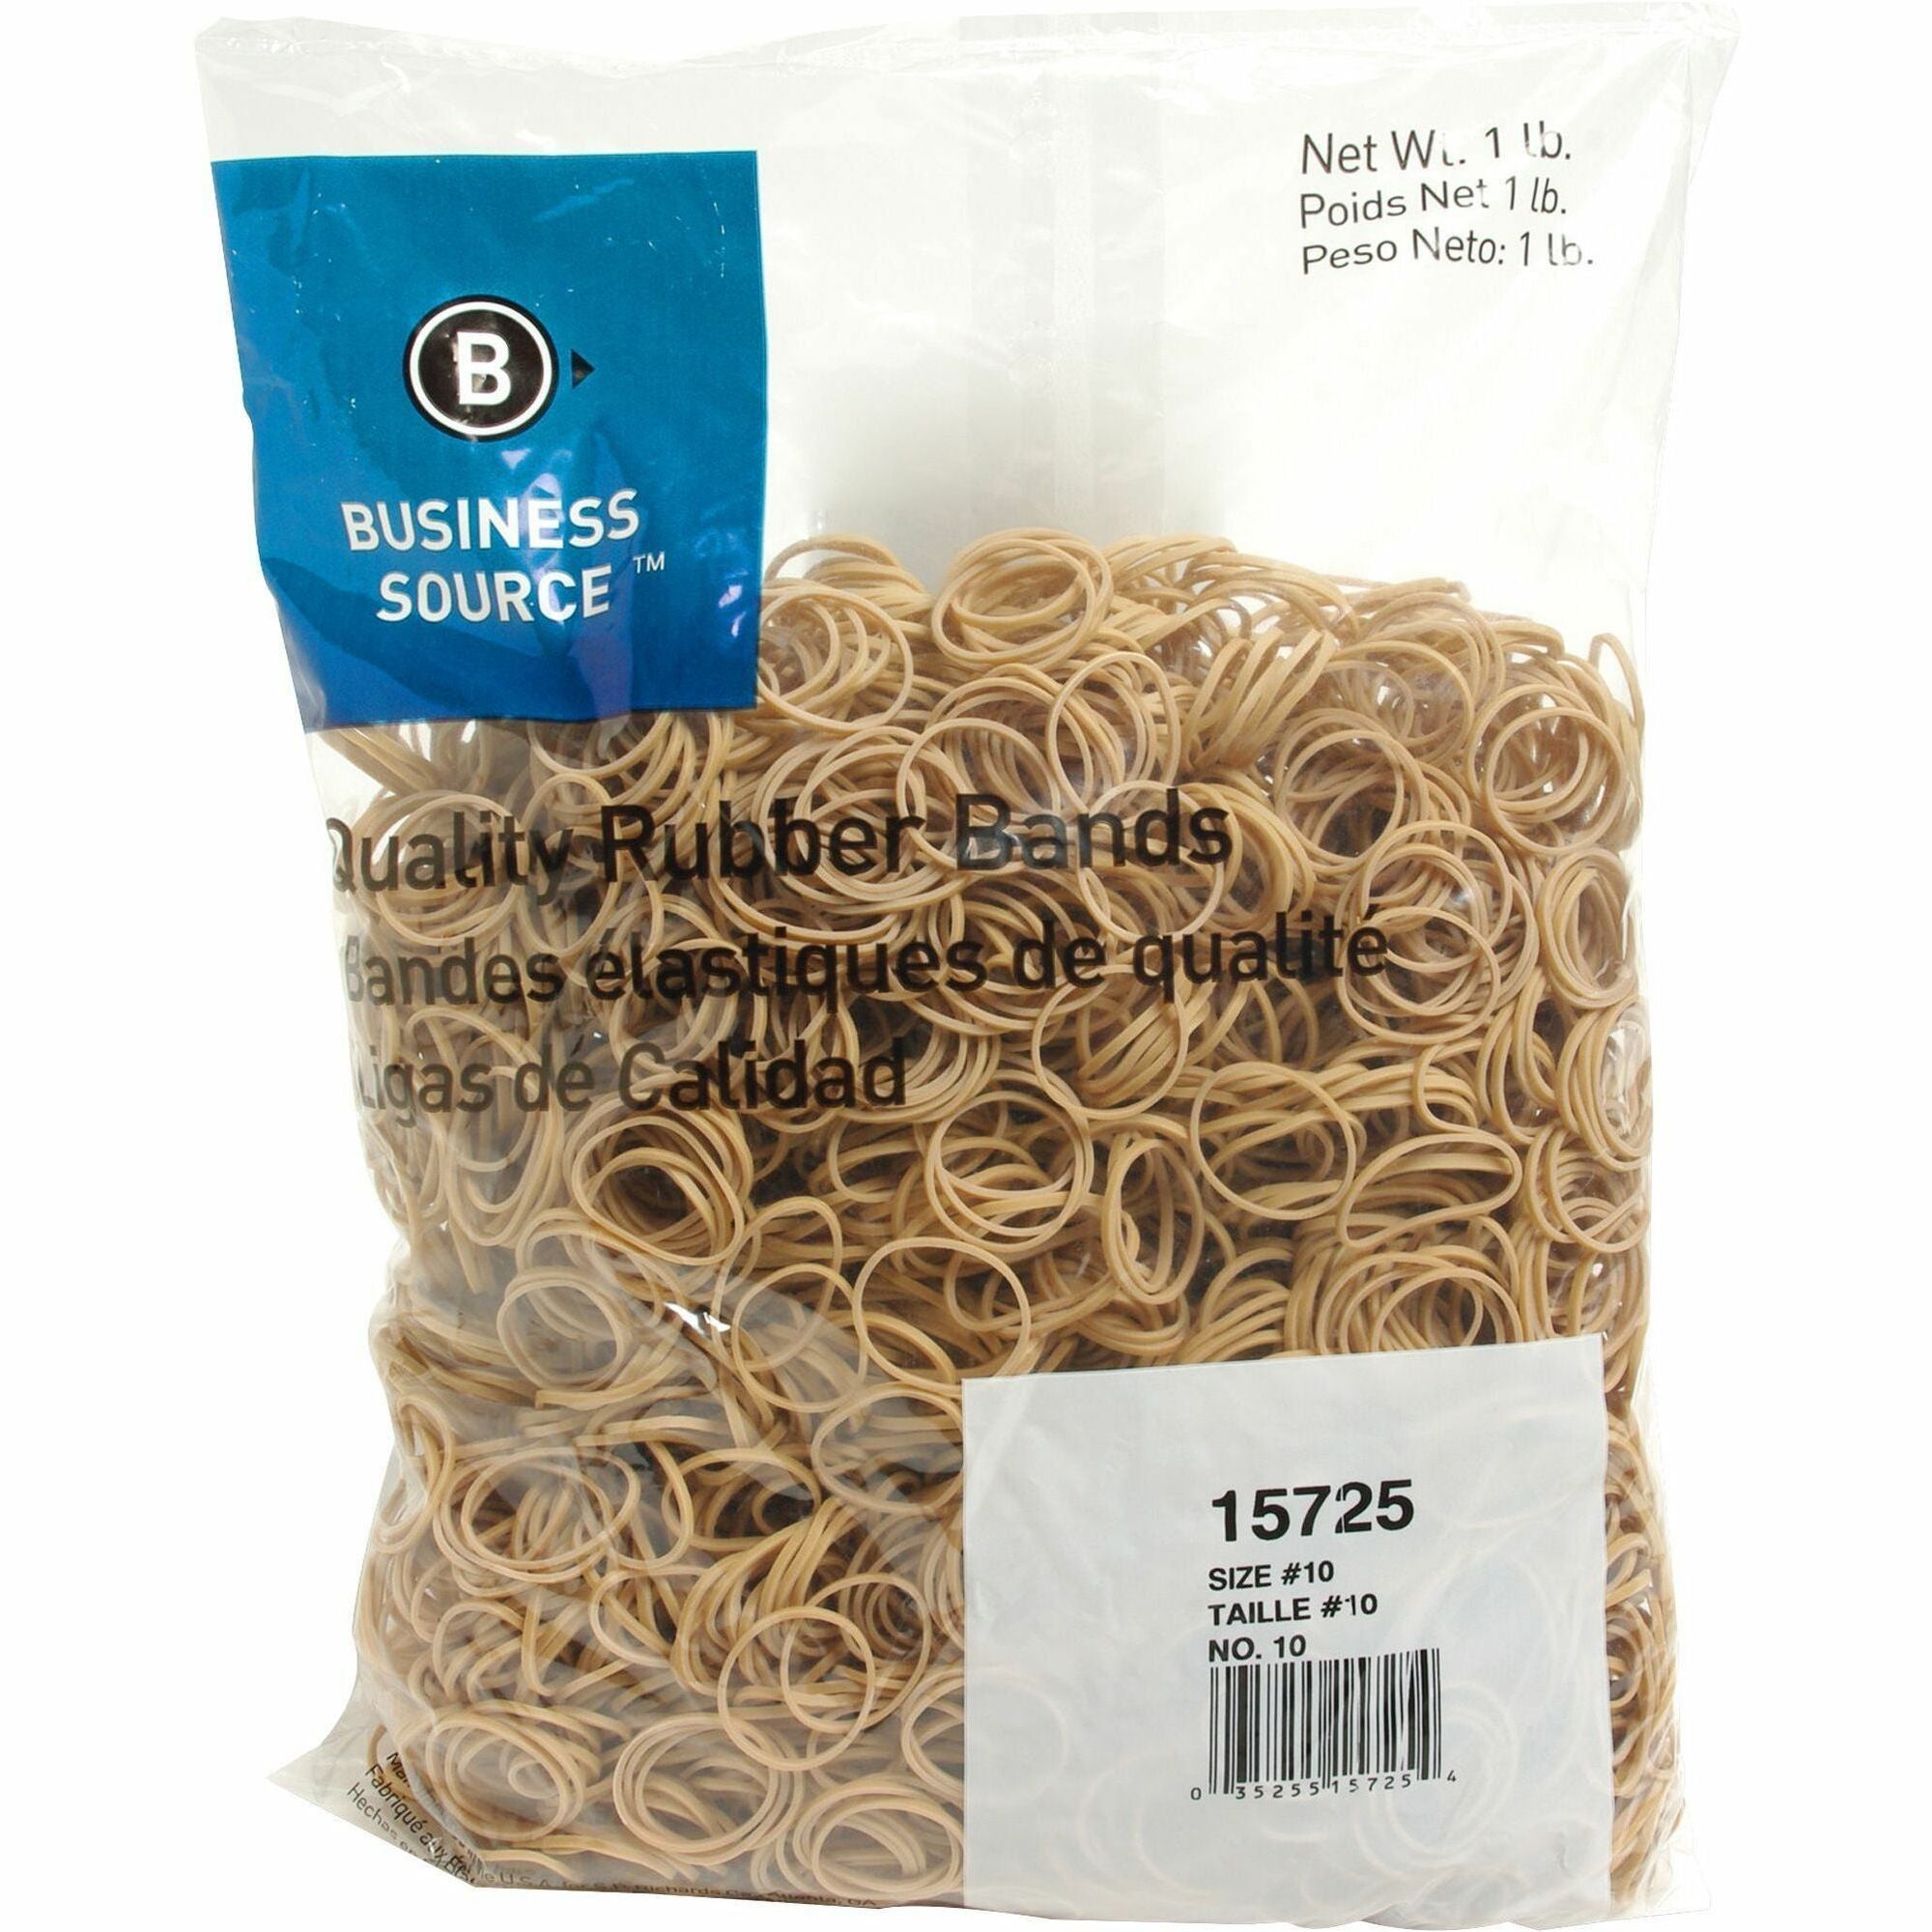 Business Source Quality Rubber Bands - Size: #10 - 1.3" Length x 0.1" Width - Sustainable - 3700 / Pack - Rubber - Crepe - 